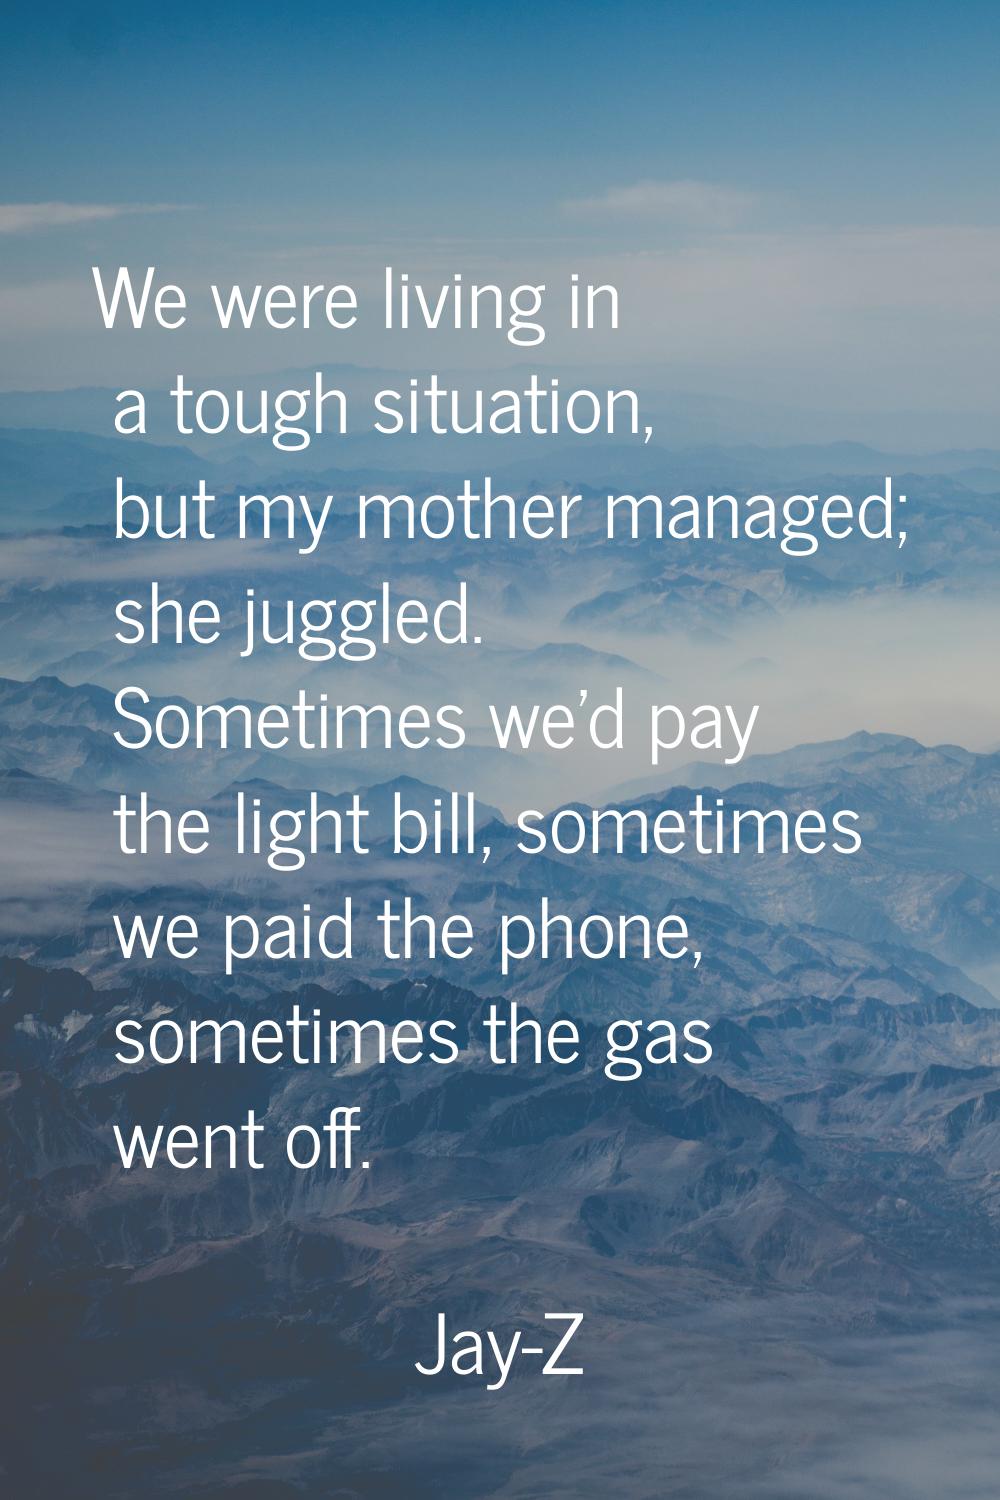 We were living in a tough situation, but my mother managed; she juggled. Sometimes we'd pay the lig